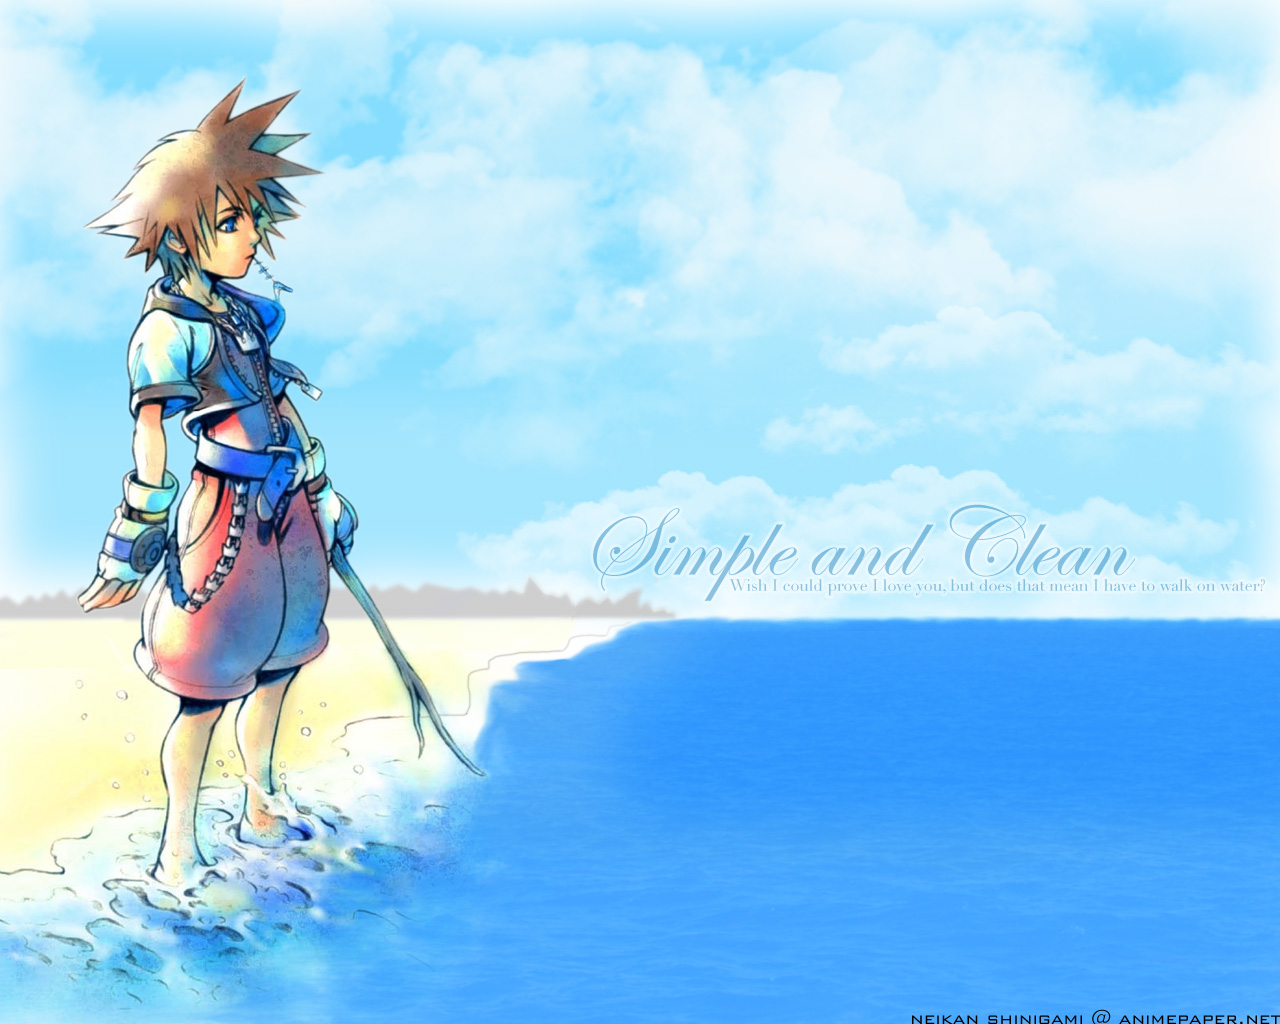 Kingdom Hearts Free PC Game HD Wallpaper Imagez Only